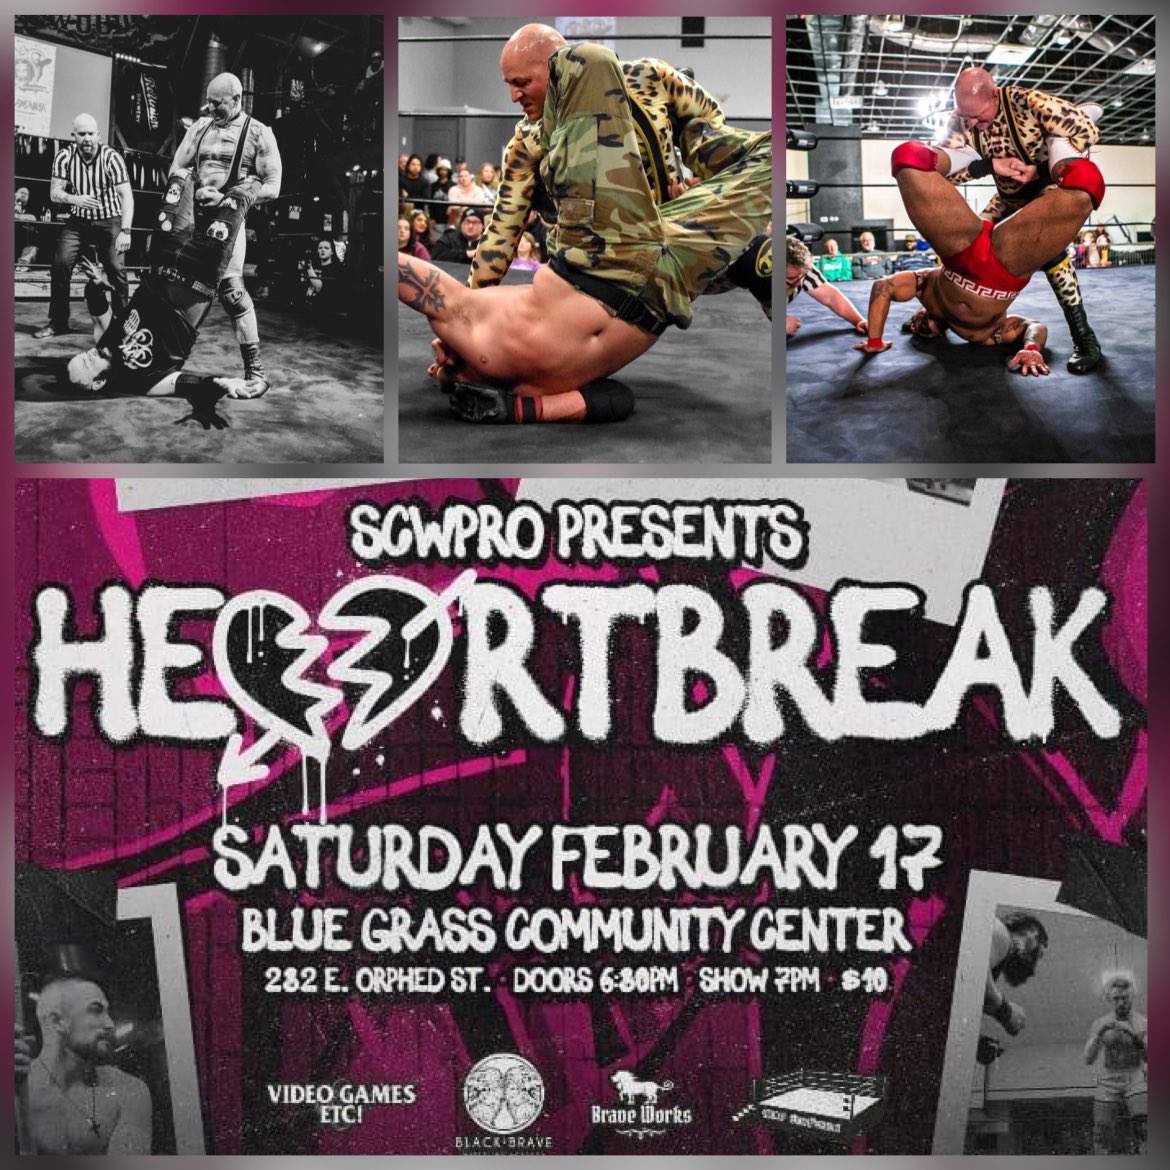 In just 1 week I get my shot at becoming a 3x @scwpro #IowaChampion by locking of my opponents in the #Breathtaker and watching them tap out! 

2/17/24 
Blue Grass Community Center 
Blue Grass, Iowa 
7pm 🔔 $10 🎟️